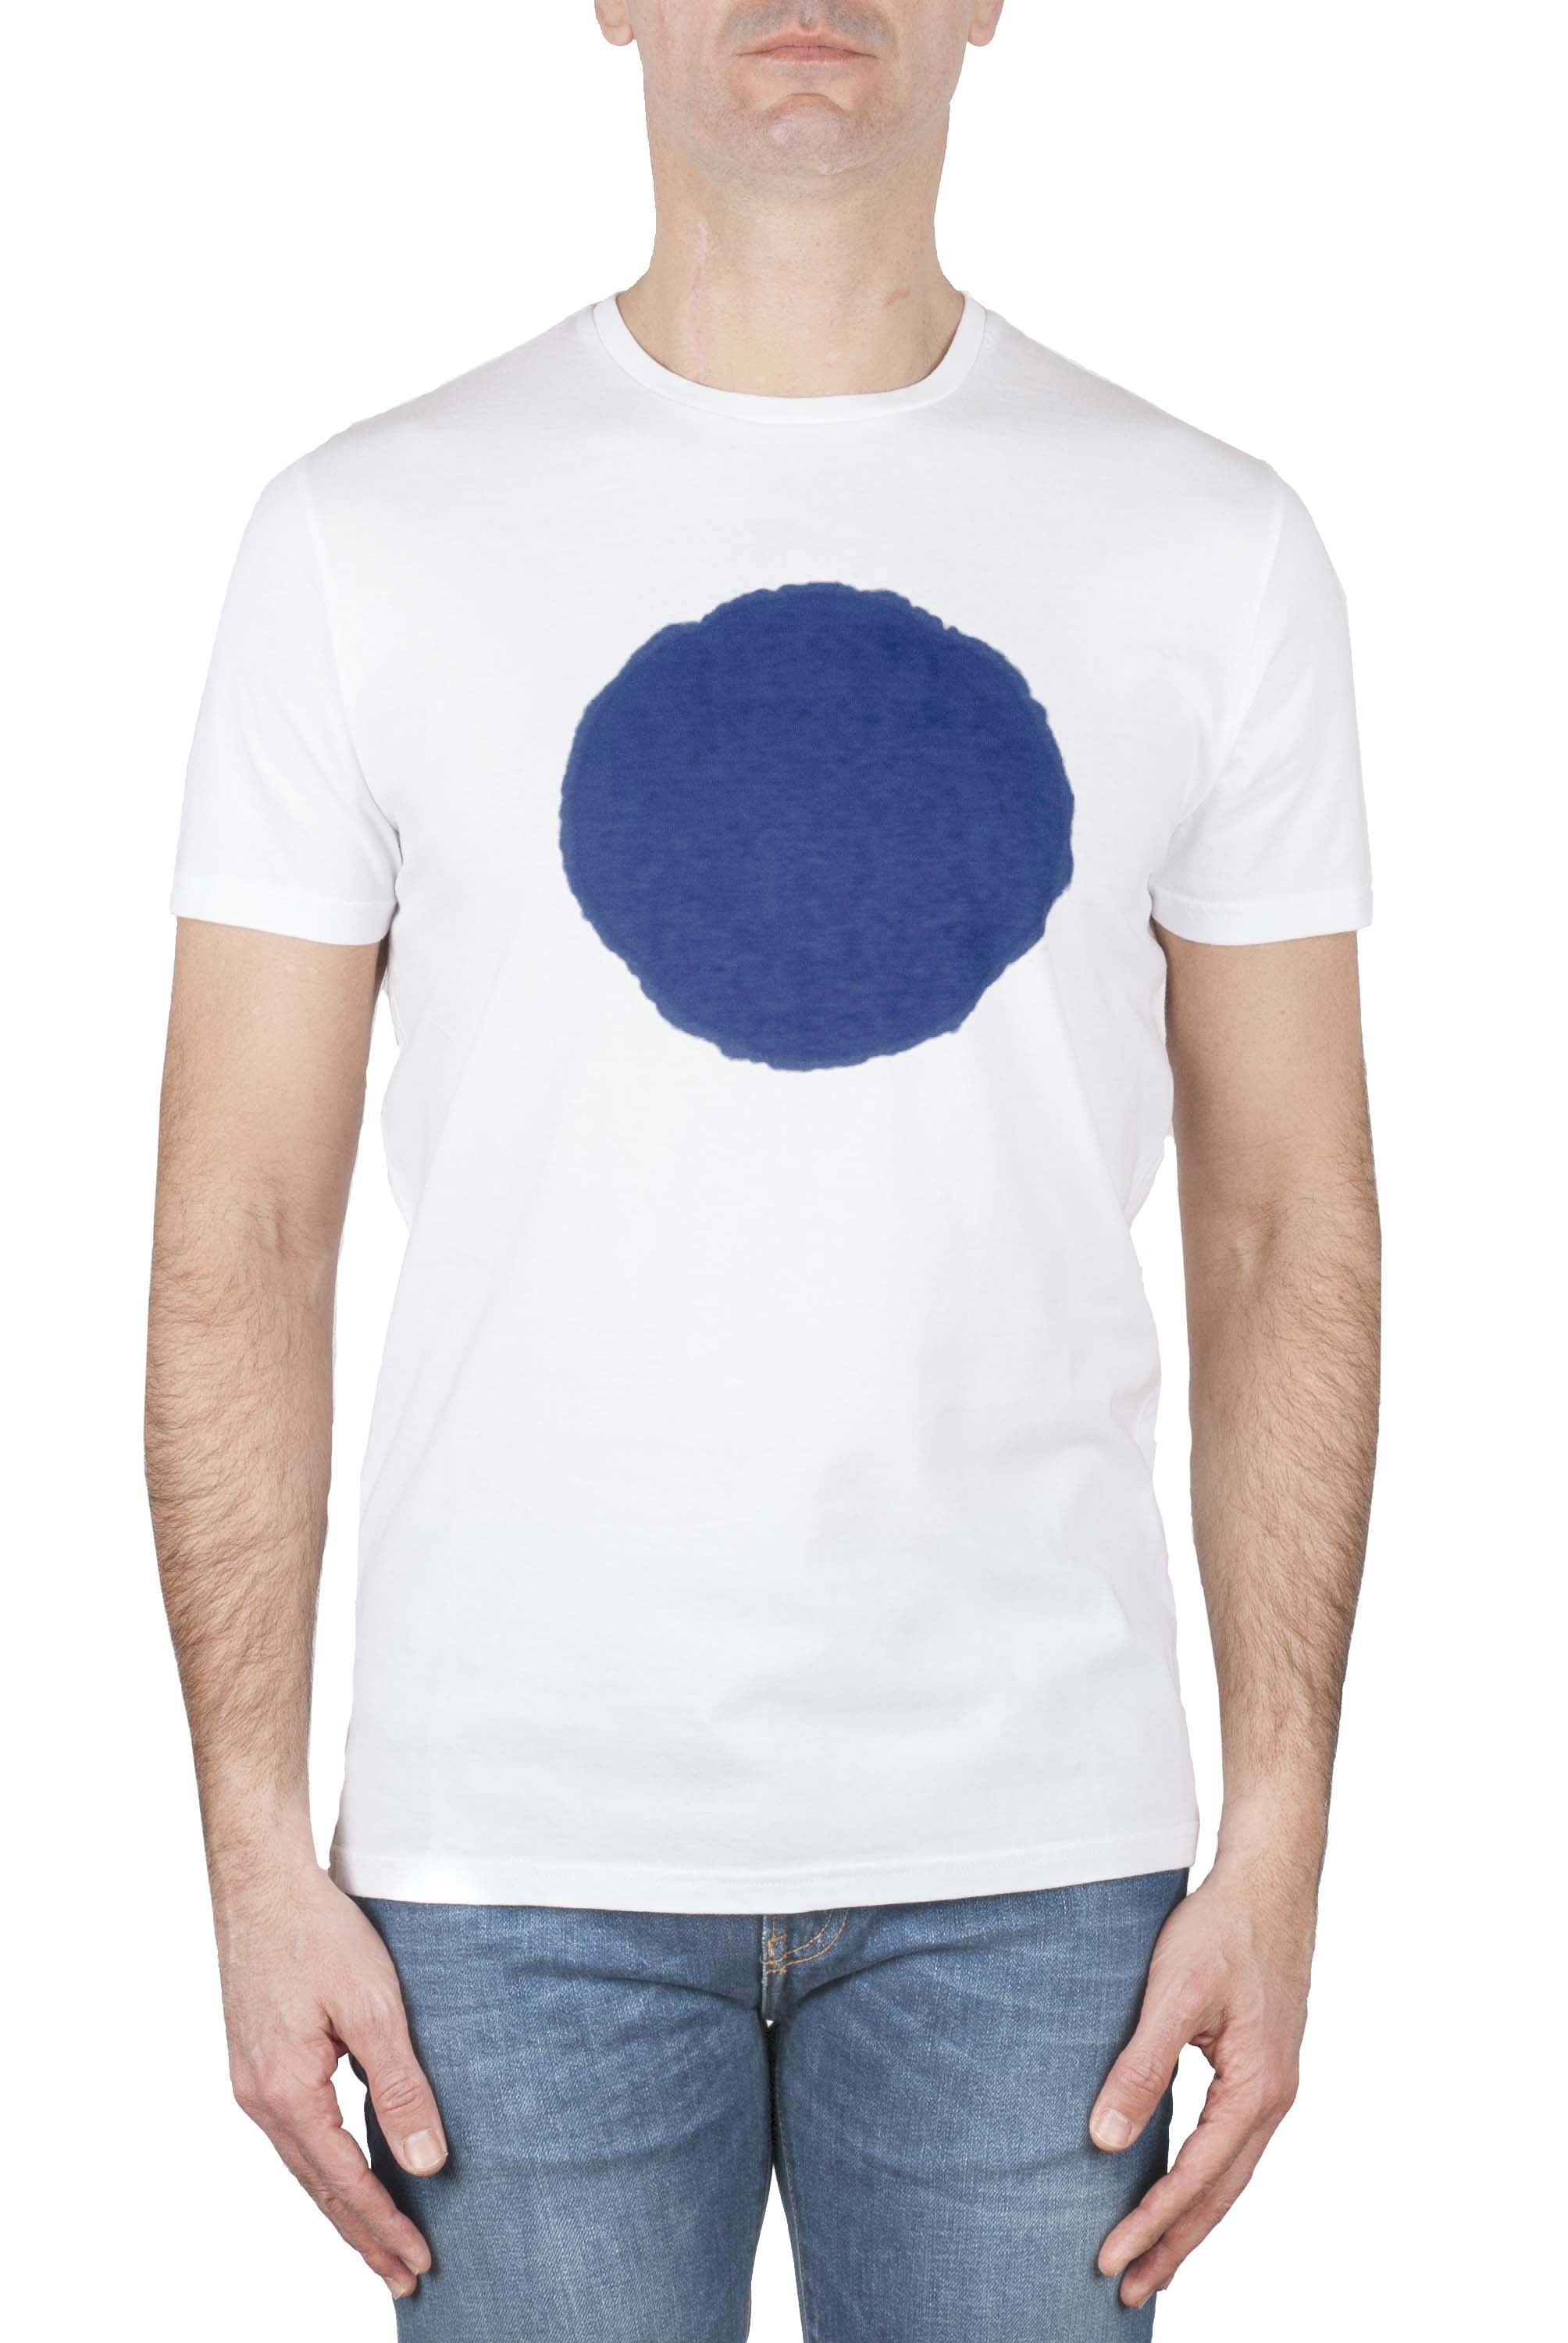 SBU 01167 Classic short sleeve cotton round neck t-shirt blue and white printed graphic 01